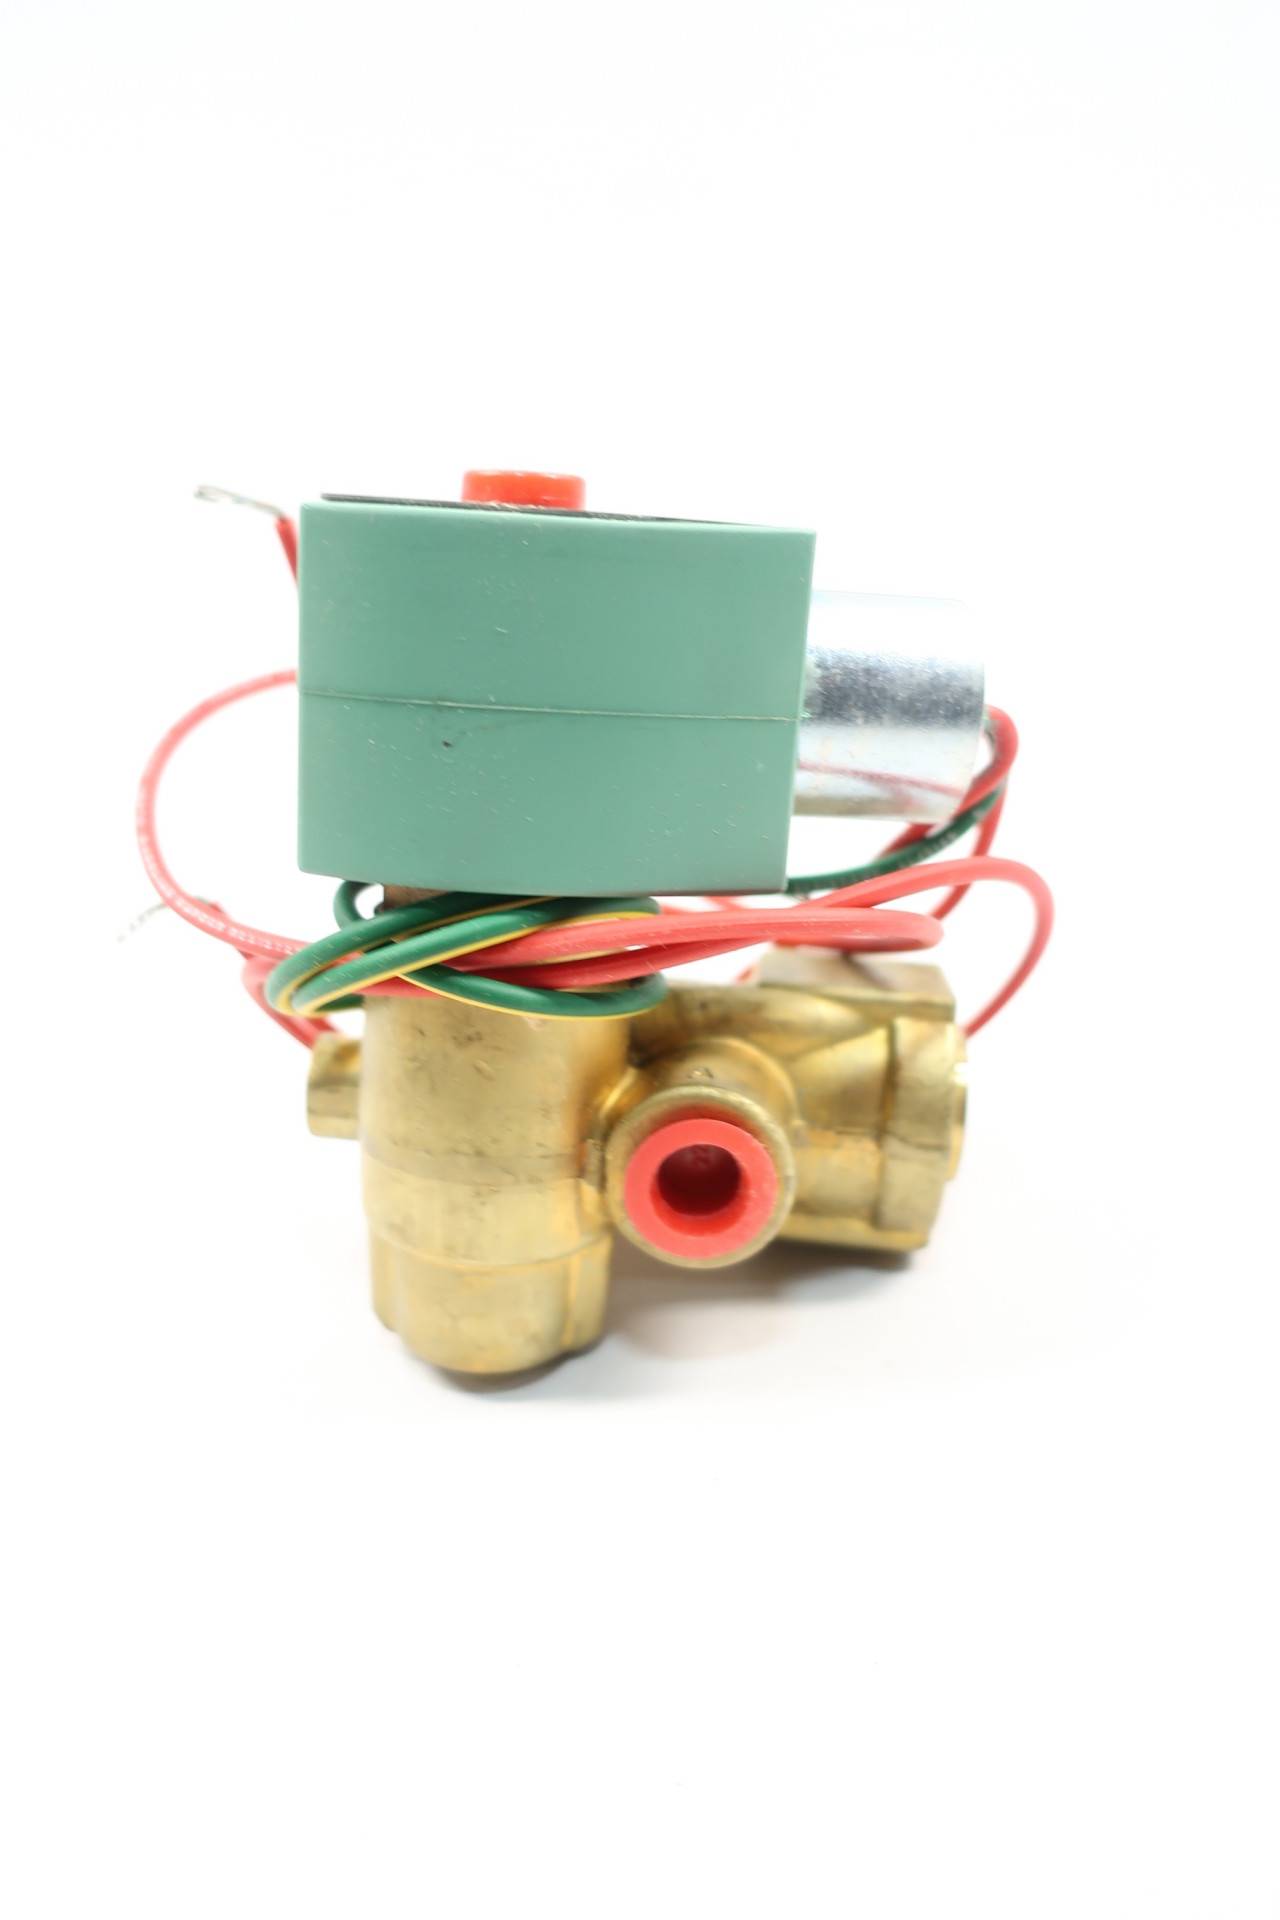 Details about  / Asco red-hat 8321g3m0 solenoid valve